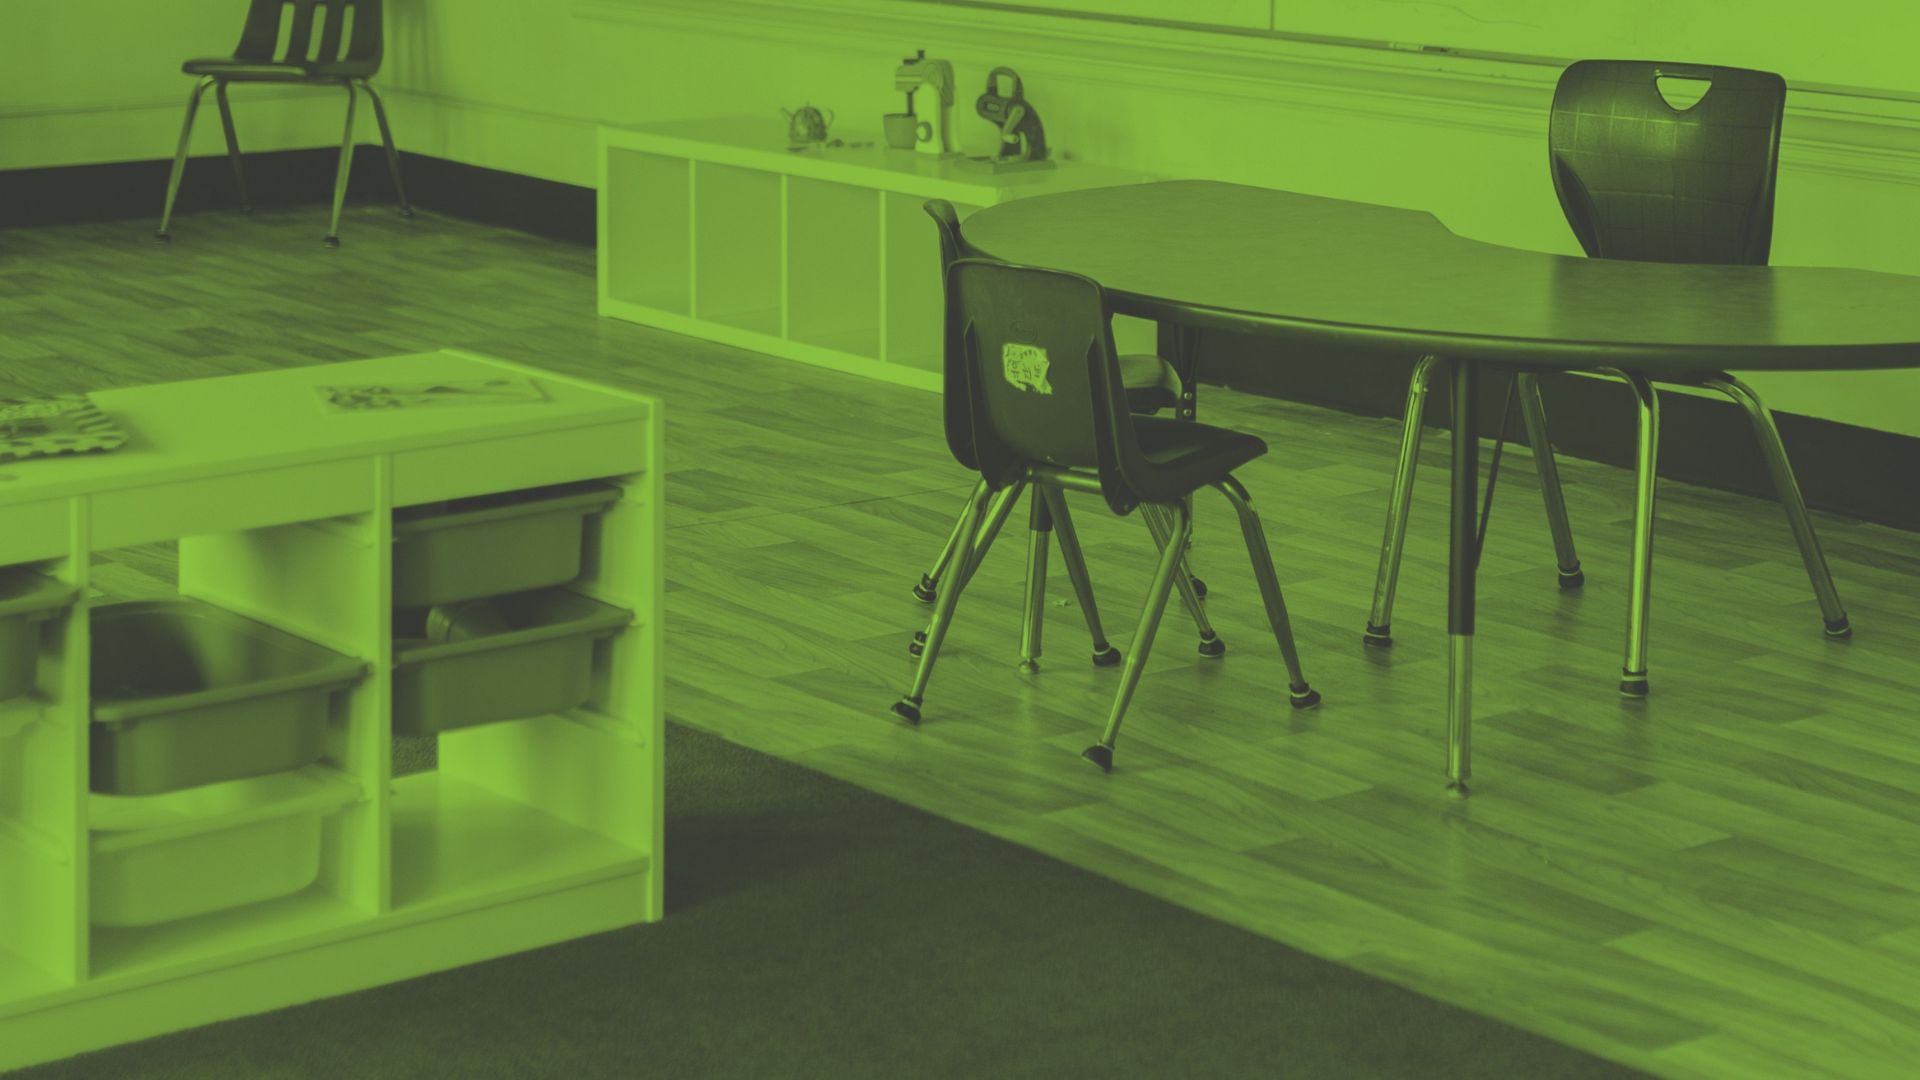 Image of school furniture in an educational setting - A Good Thing's service matches a charity's needs with corporate donations